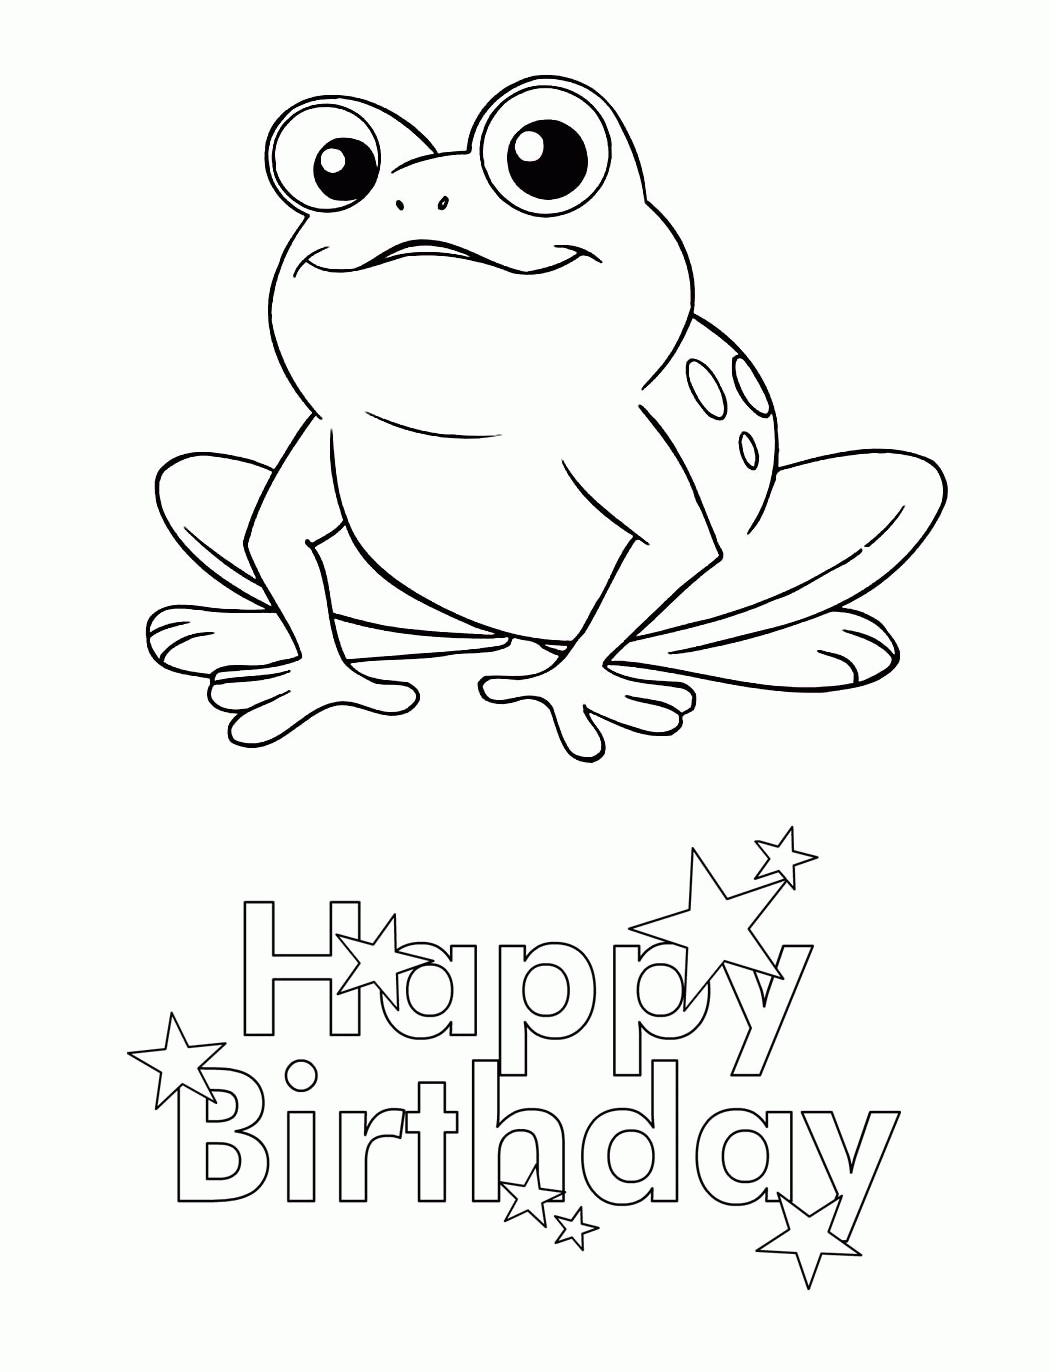 Happy Birthday Coloring Pages With Frogs - Coloring Home